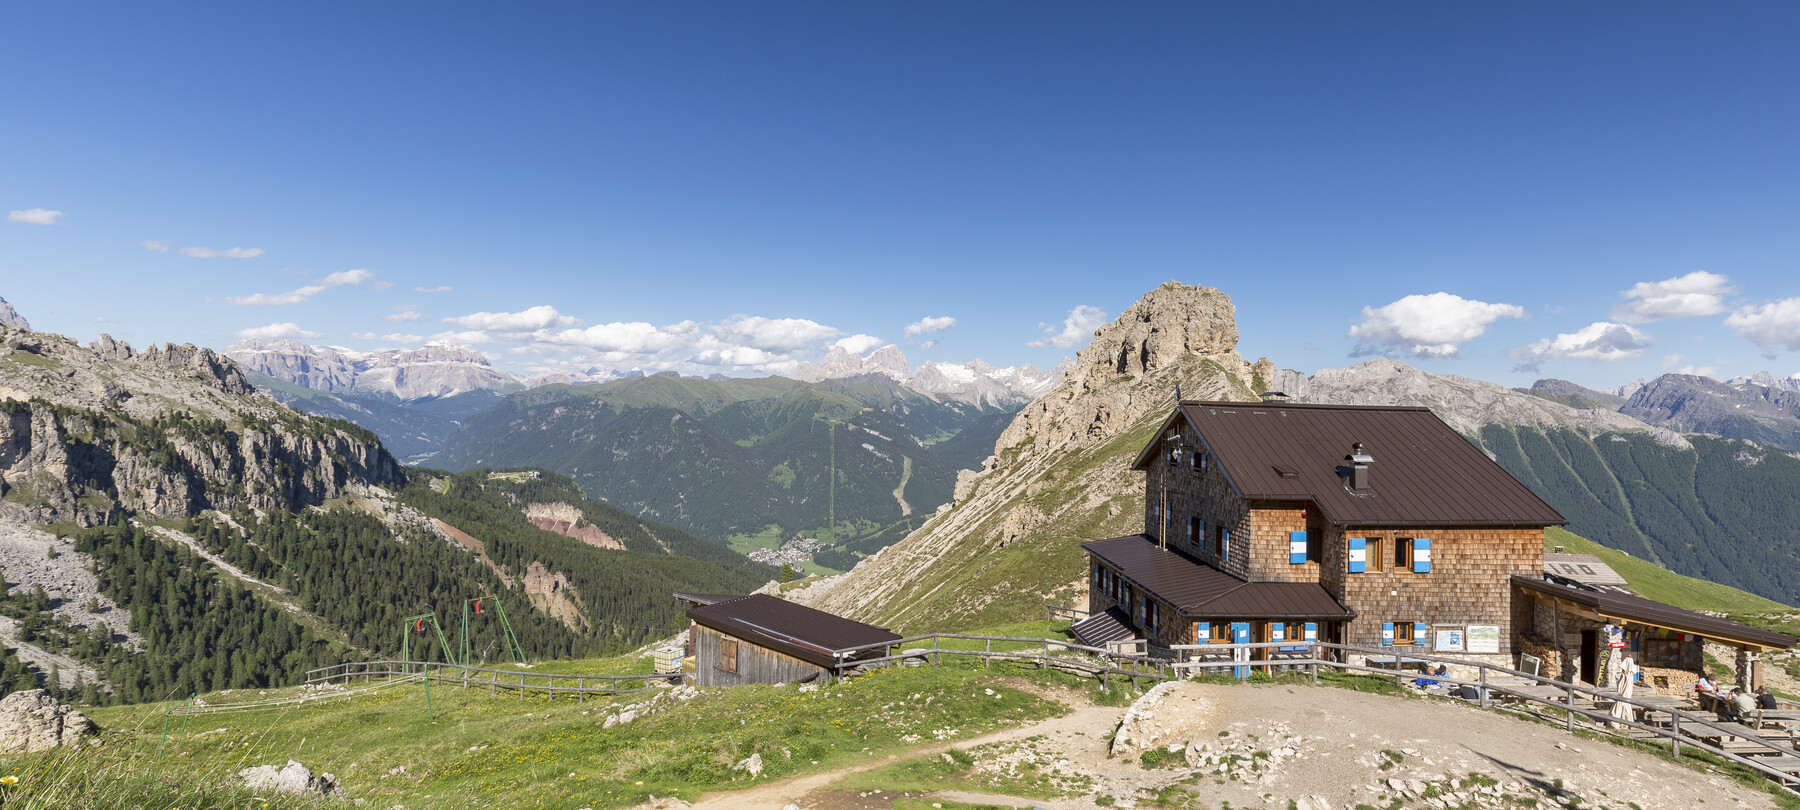 Mountain Huts Open in Spring in Trentino